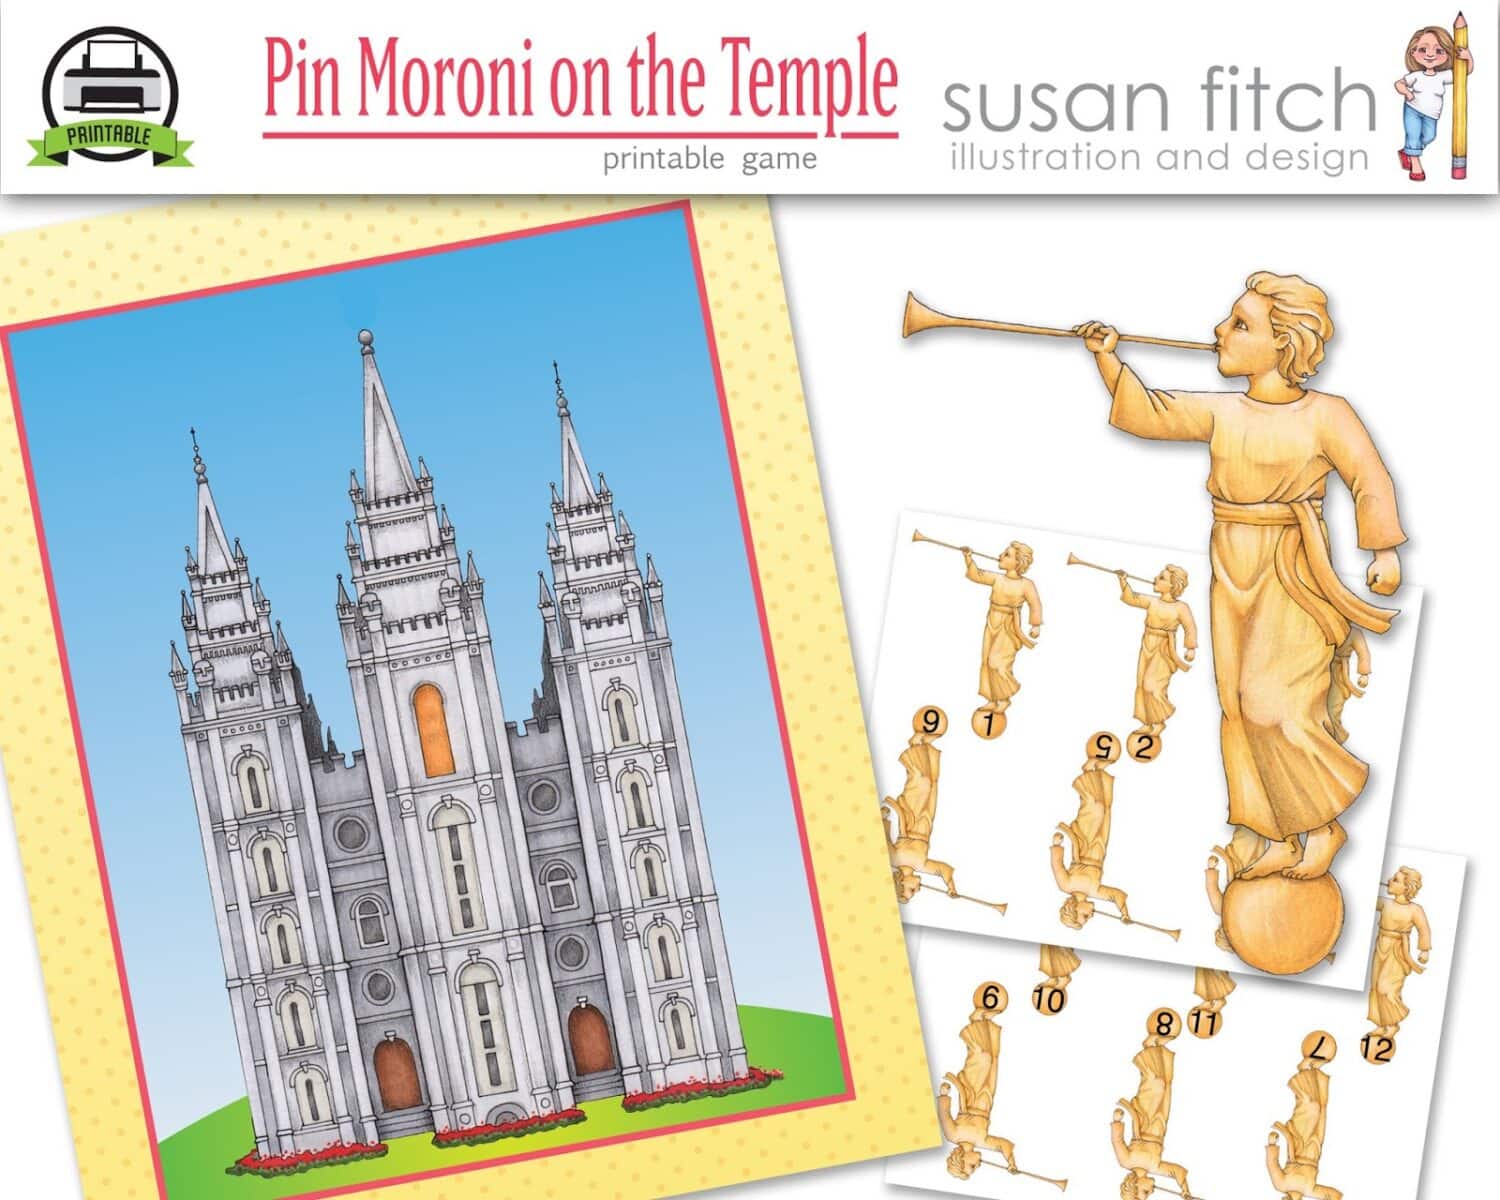 I Love to See the Temple Pin Moroni on the Temple singing time idea